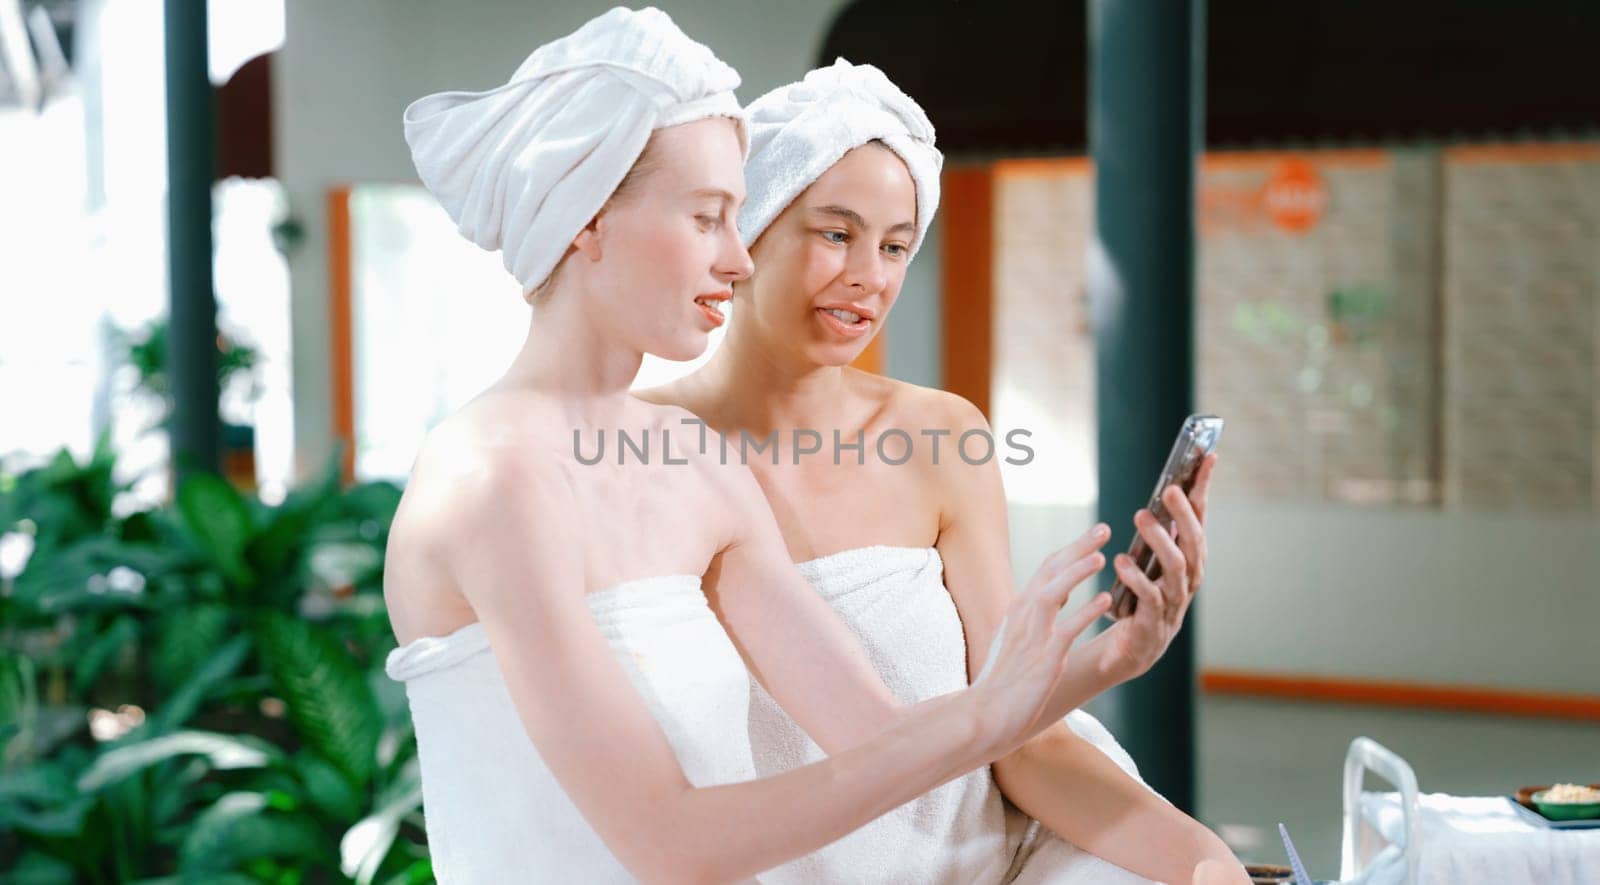 Couple of young beautiful women with beautiful skin in white towel taking a photo together at outdoor surrounded by peaceful natural environment. Beauty and healthy spa concept. Tranquility.